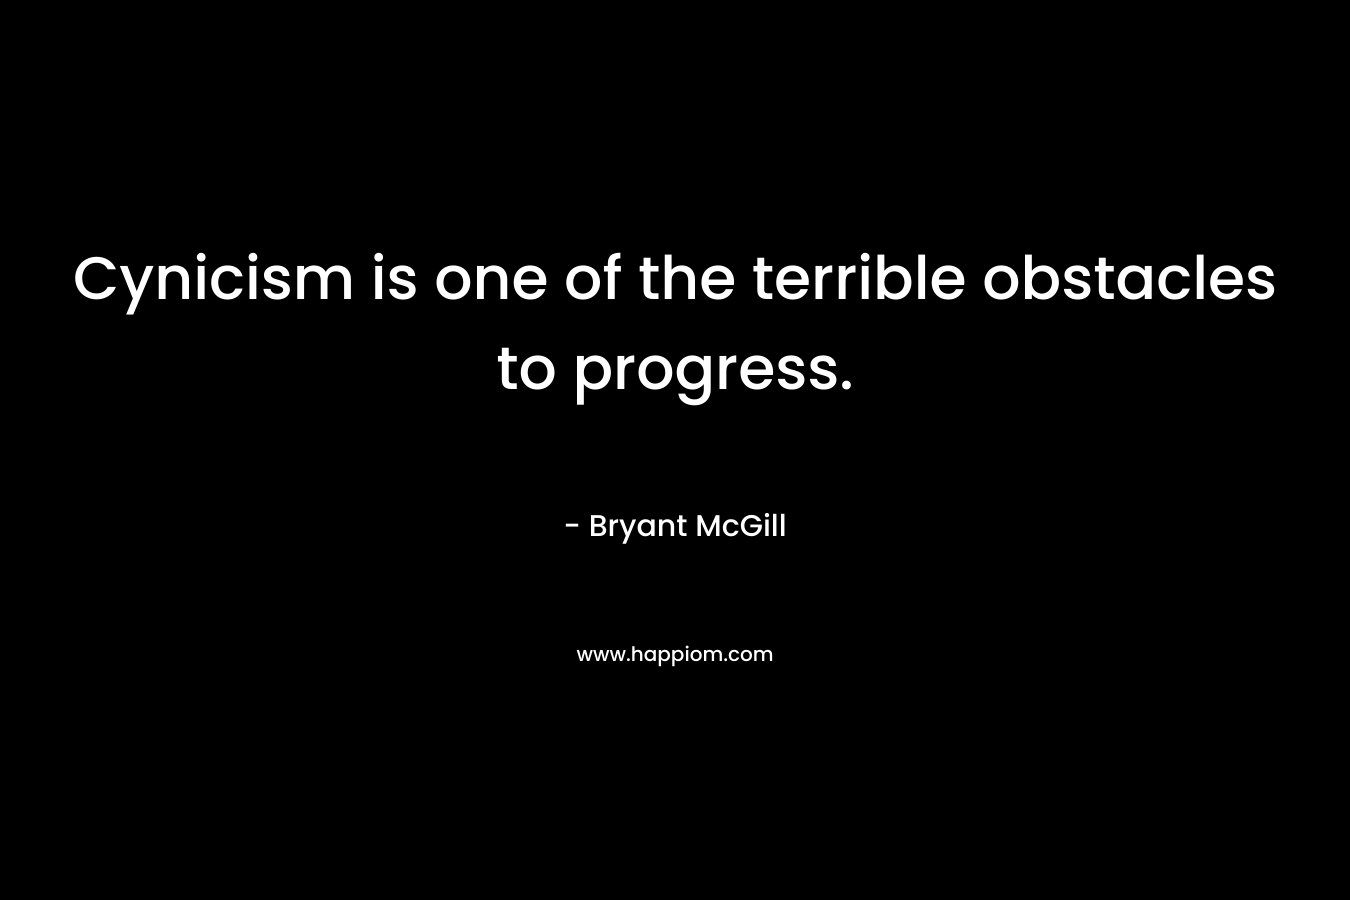 Cynicism is one of the terrible obstacles to progress. – Bryant McGill